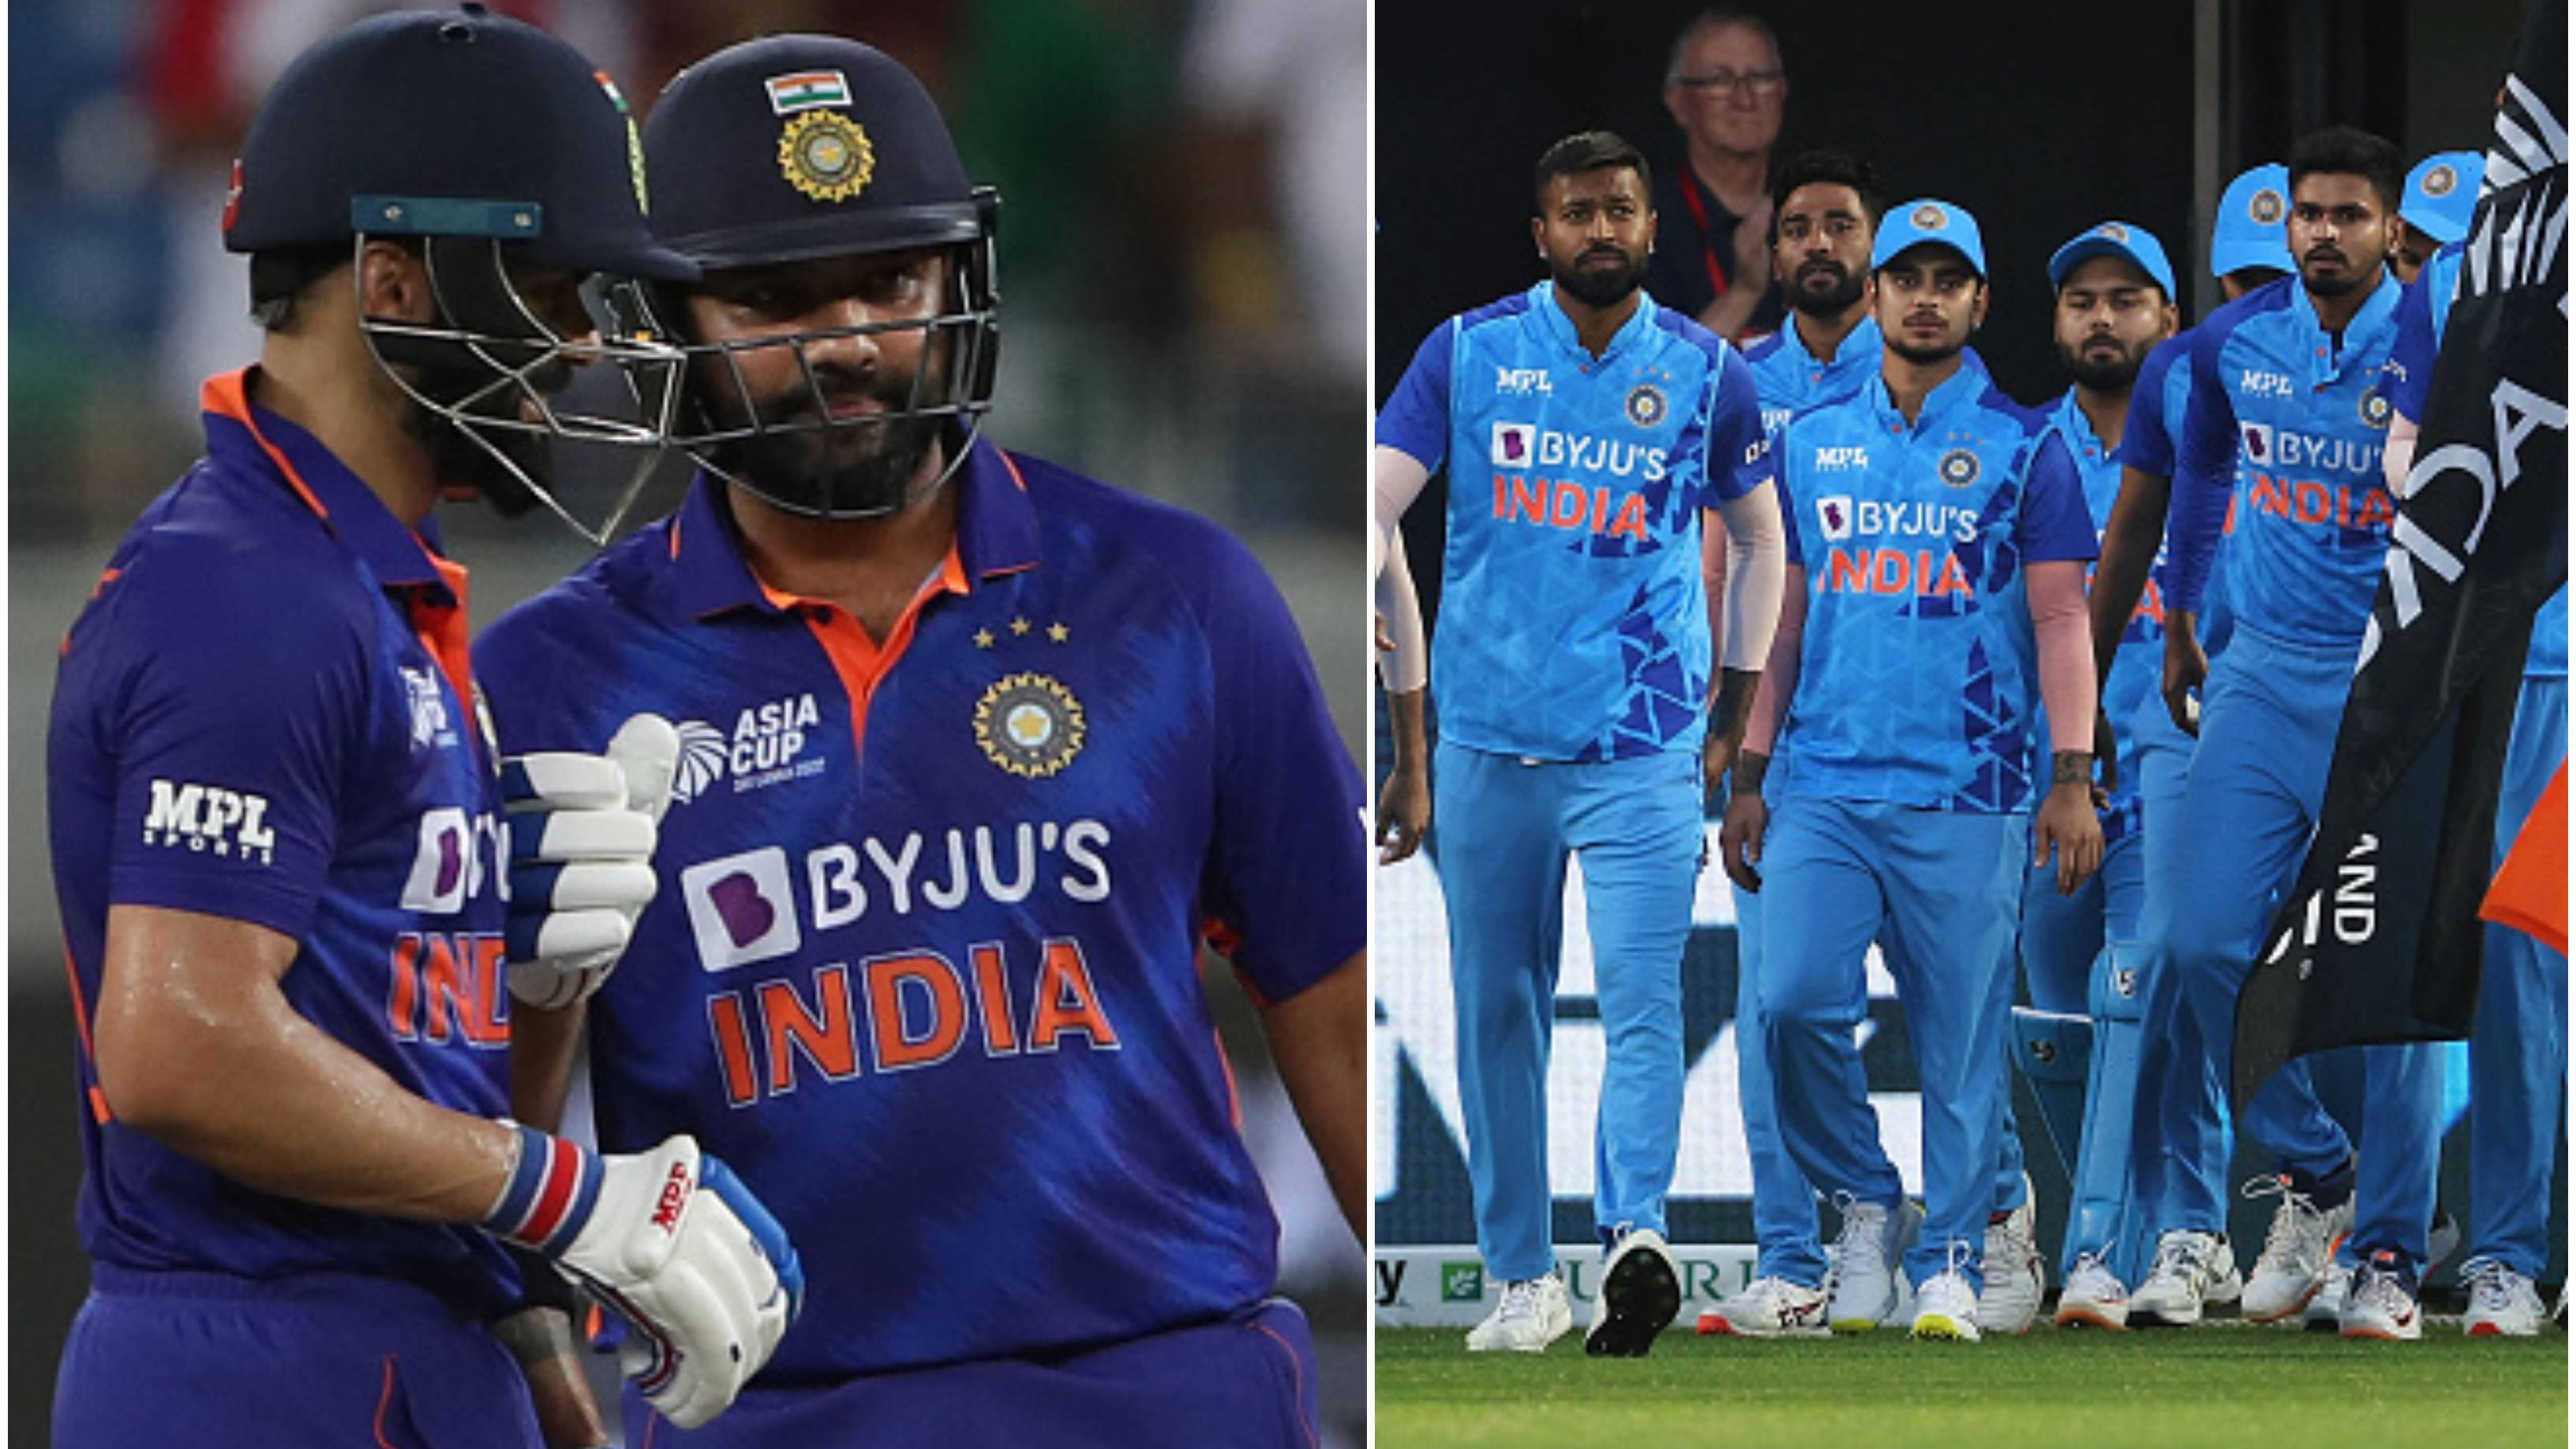 Senior Indian players likely to be rested for Afghanistan series; BCCI likely to field second string side – Report